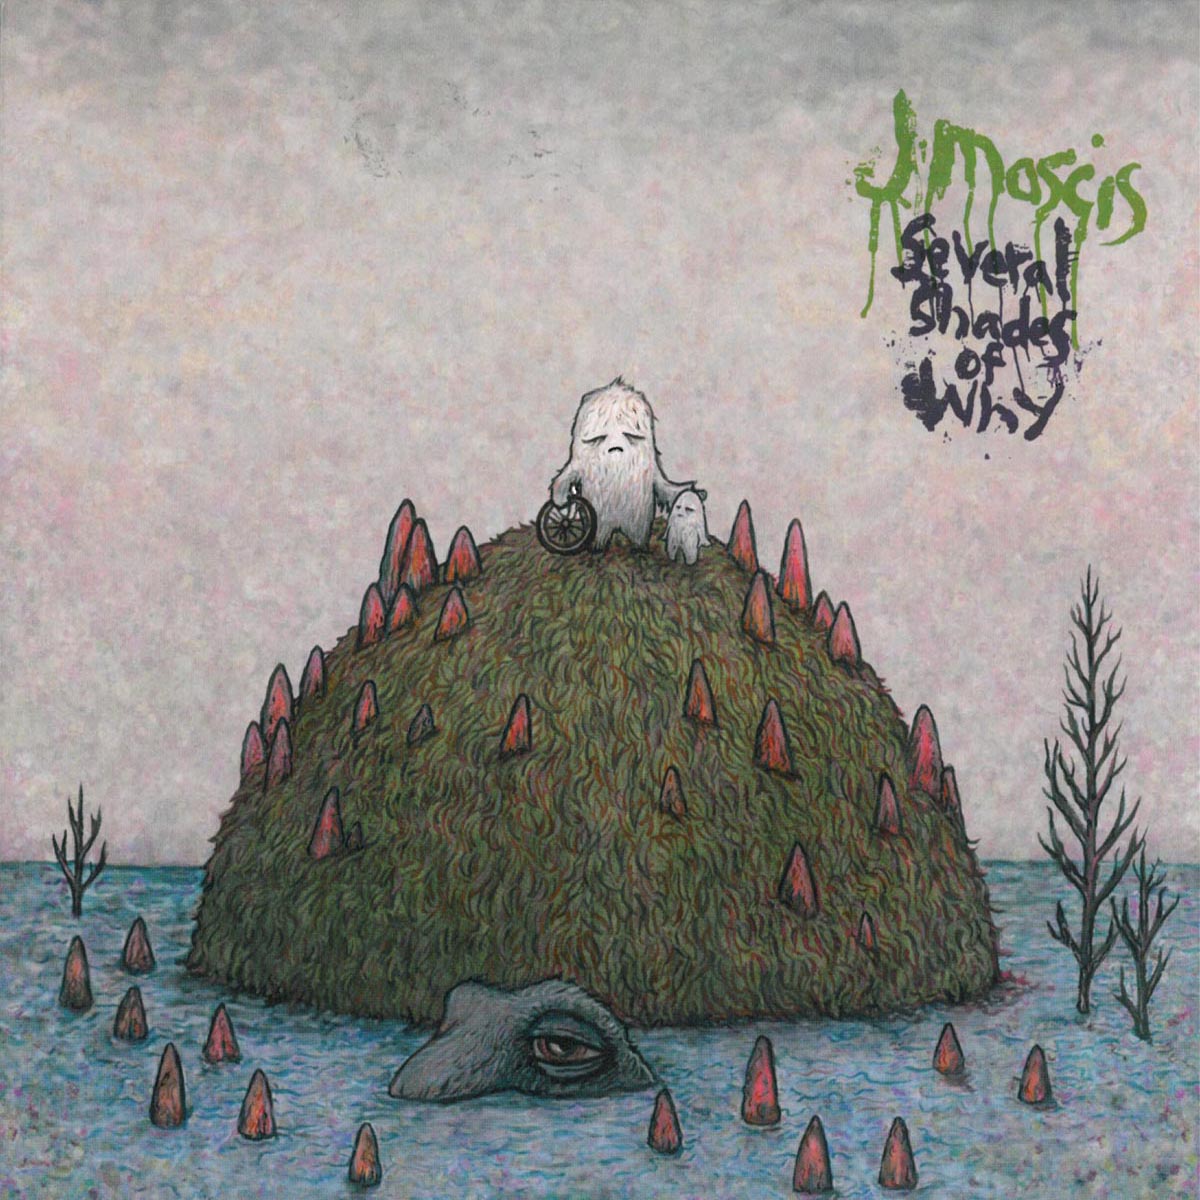 J Mascis - Several Shades of Why - LP